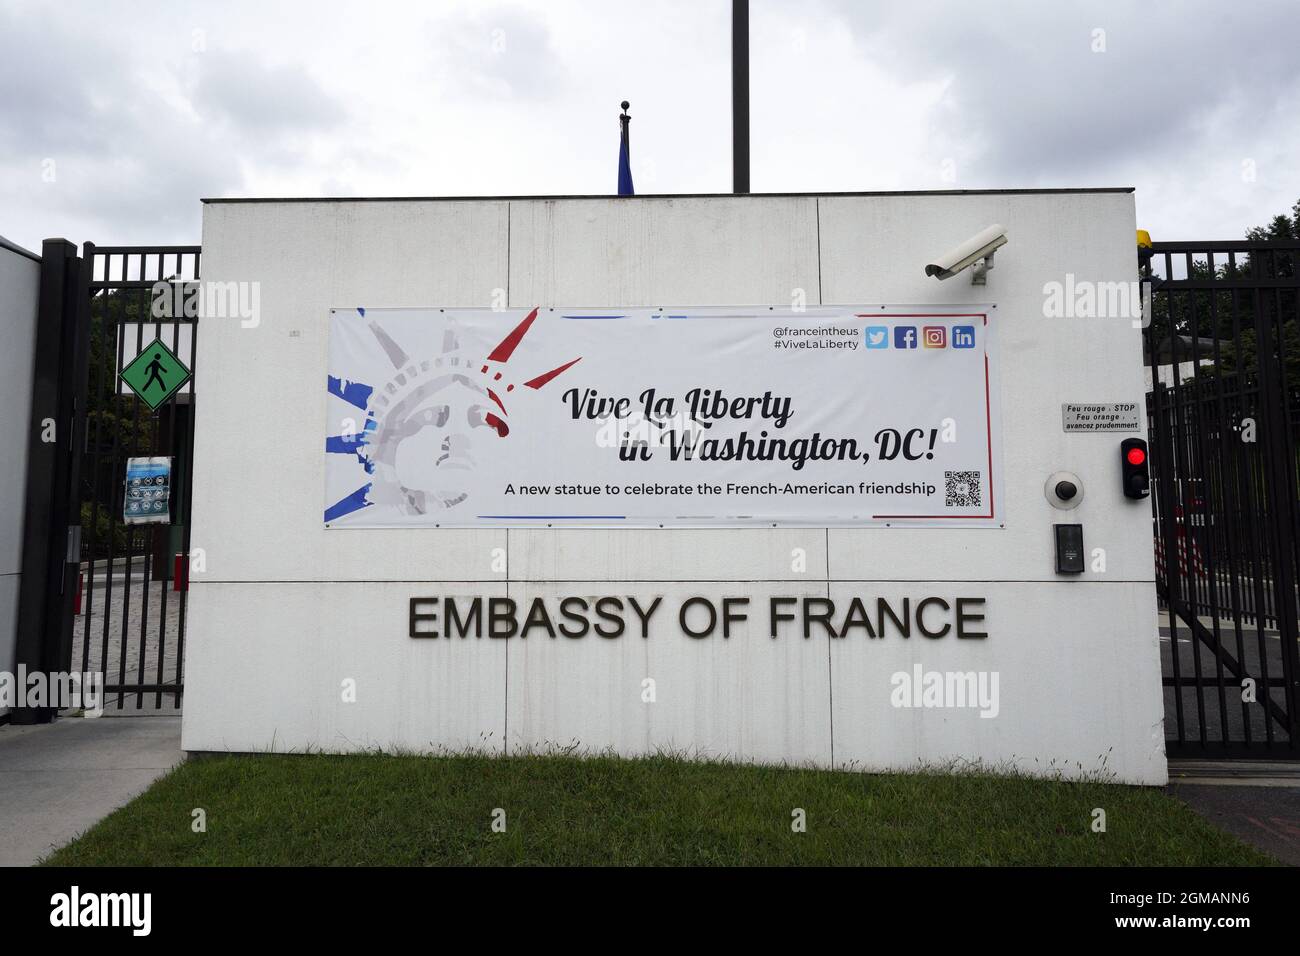 France in the United States / Embassy of France in Washington, D.C.